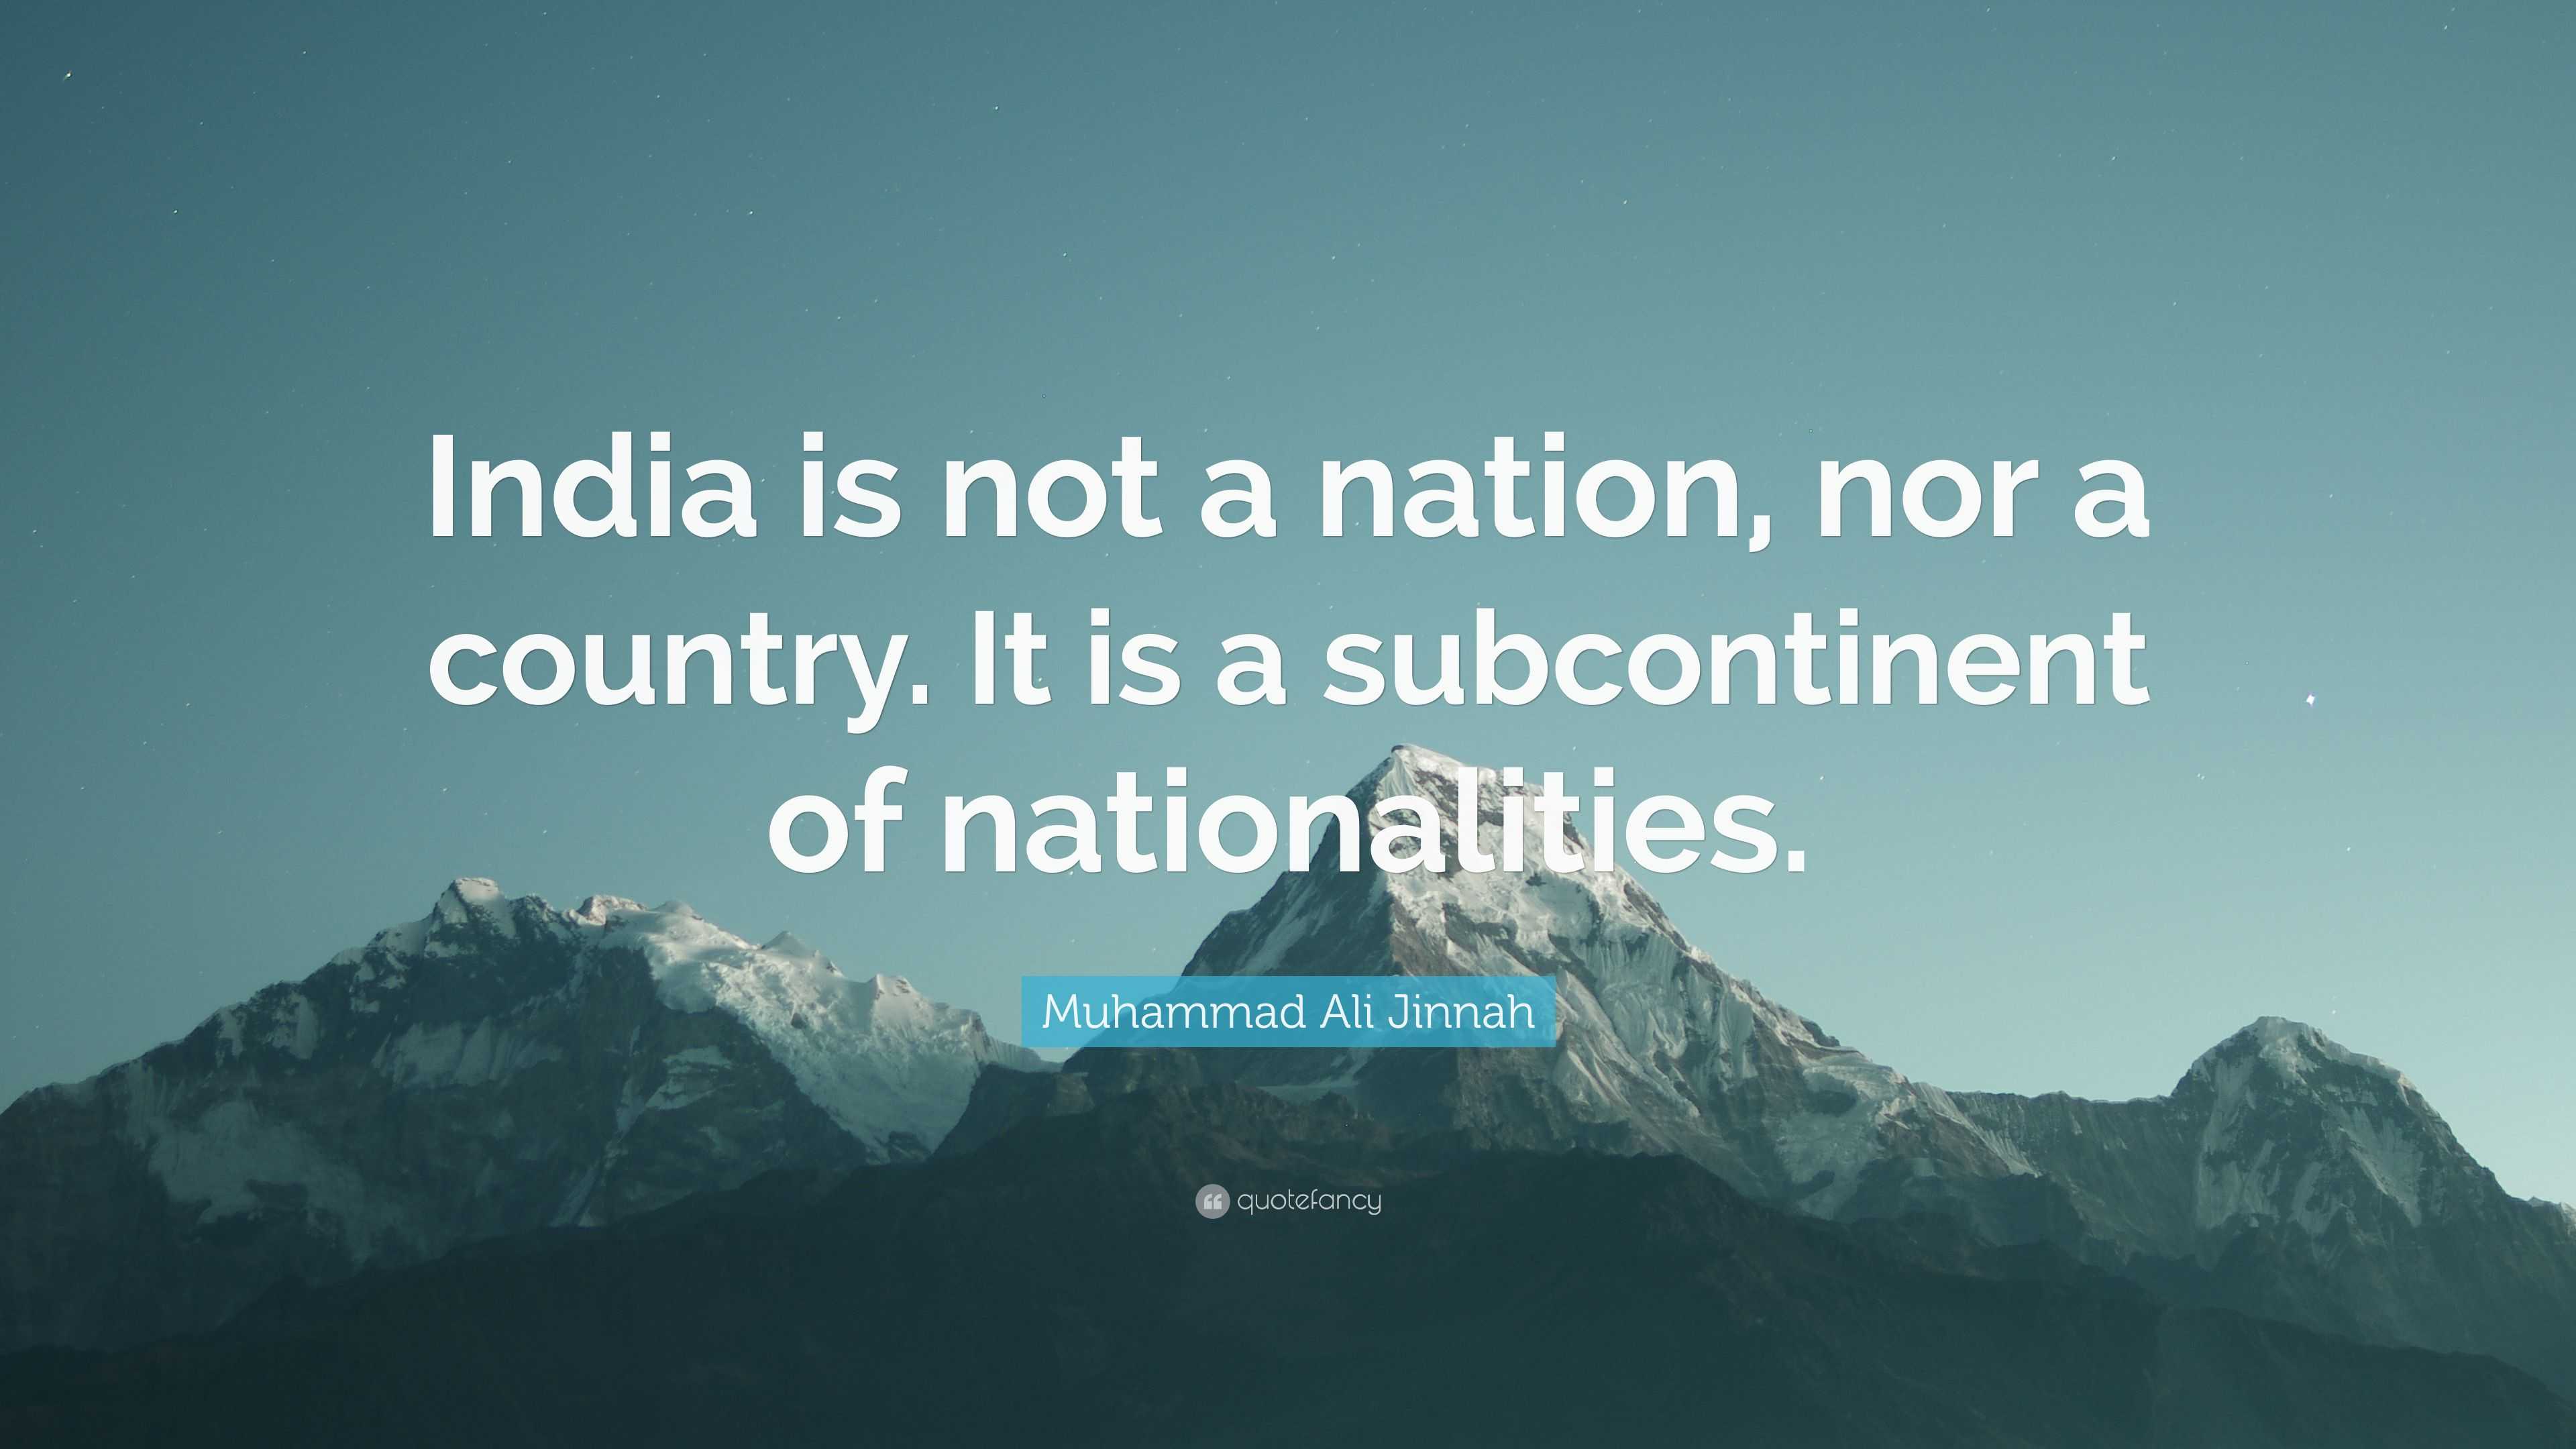 Muhammad Ali Jinnah Quote: "India is not a nation, nor a ...